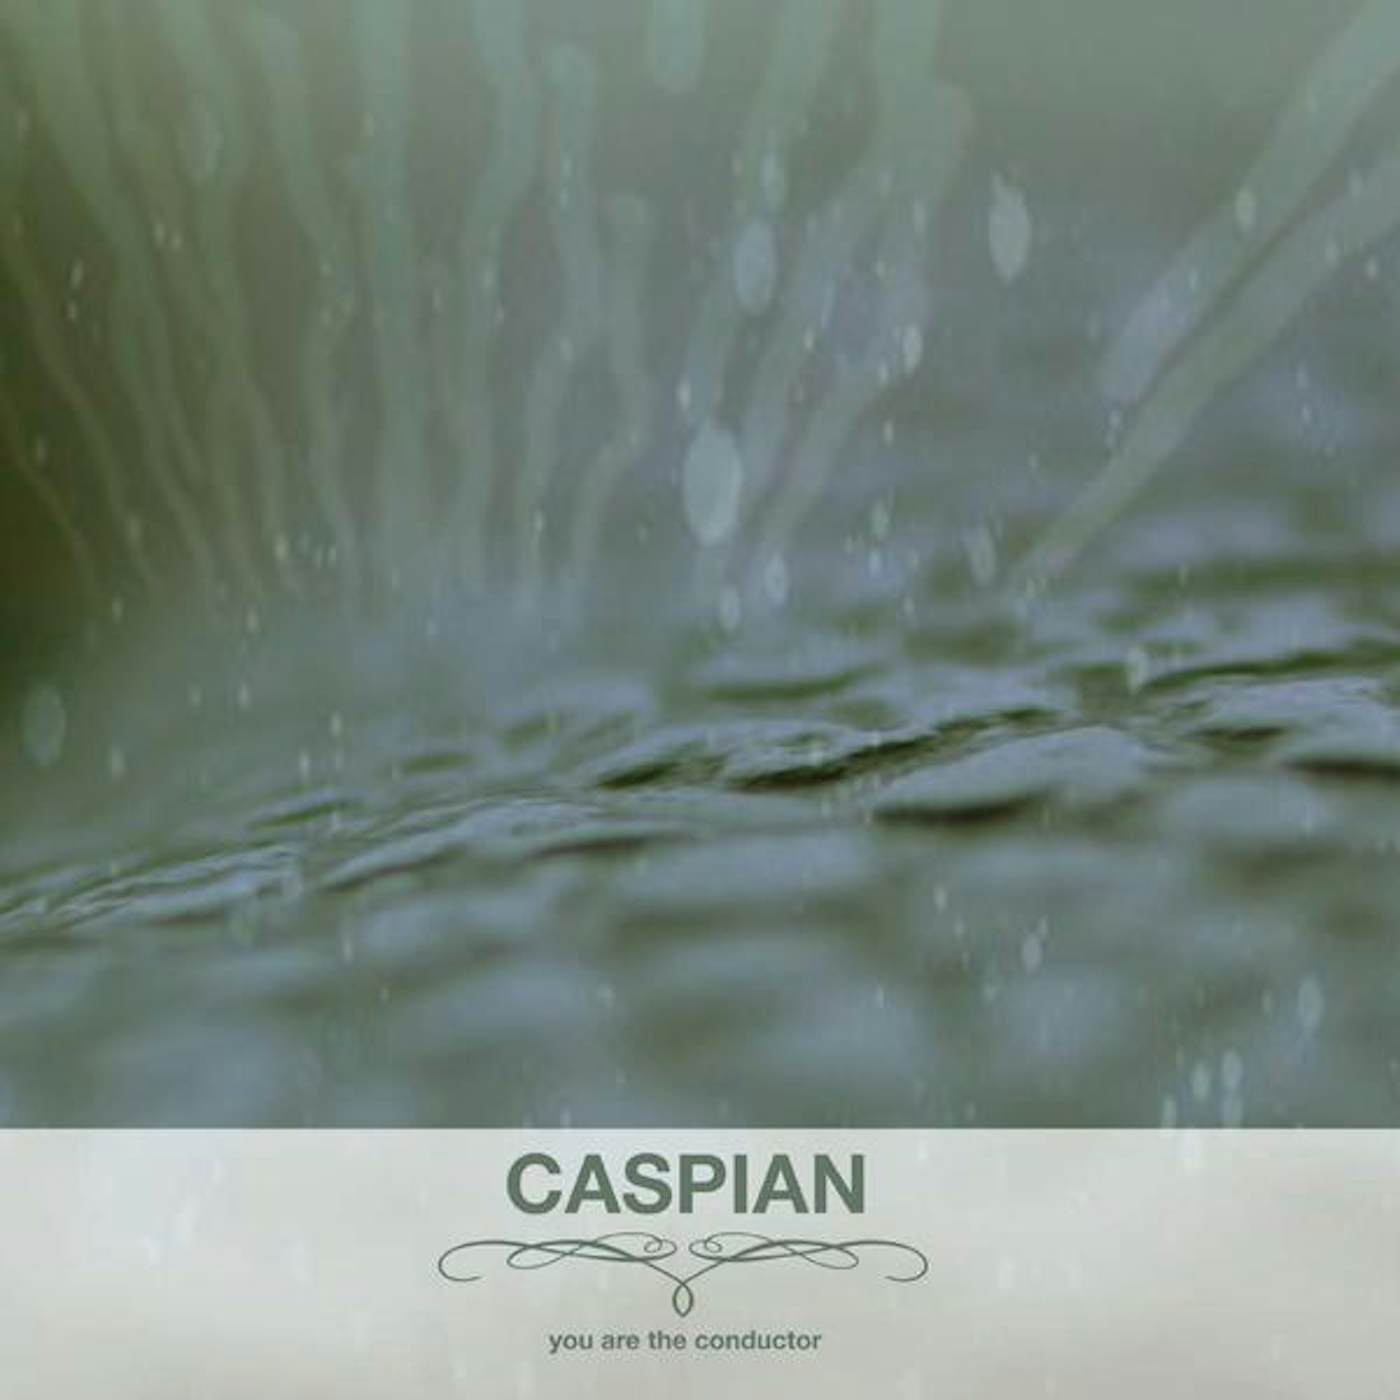 Caspian You Are the Conductor Vinyl Record